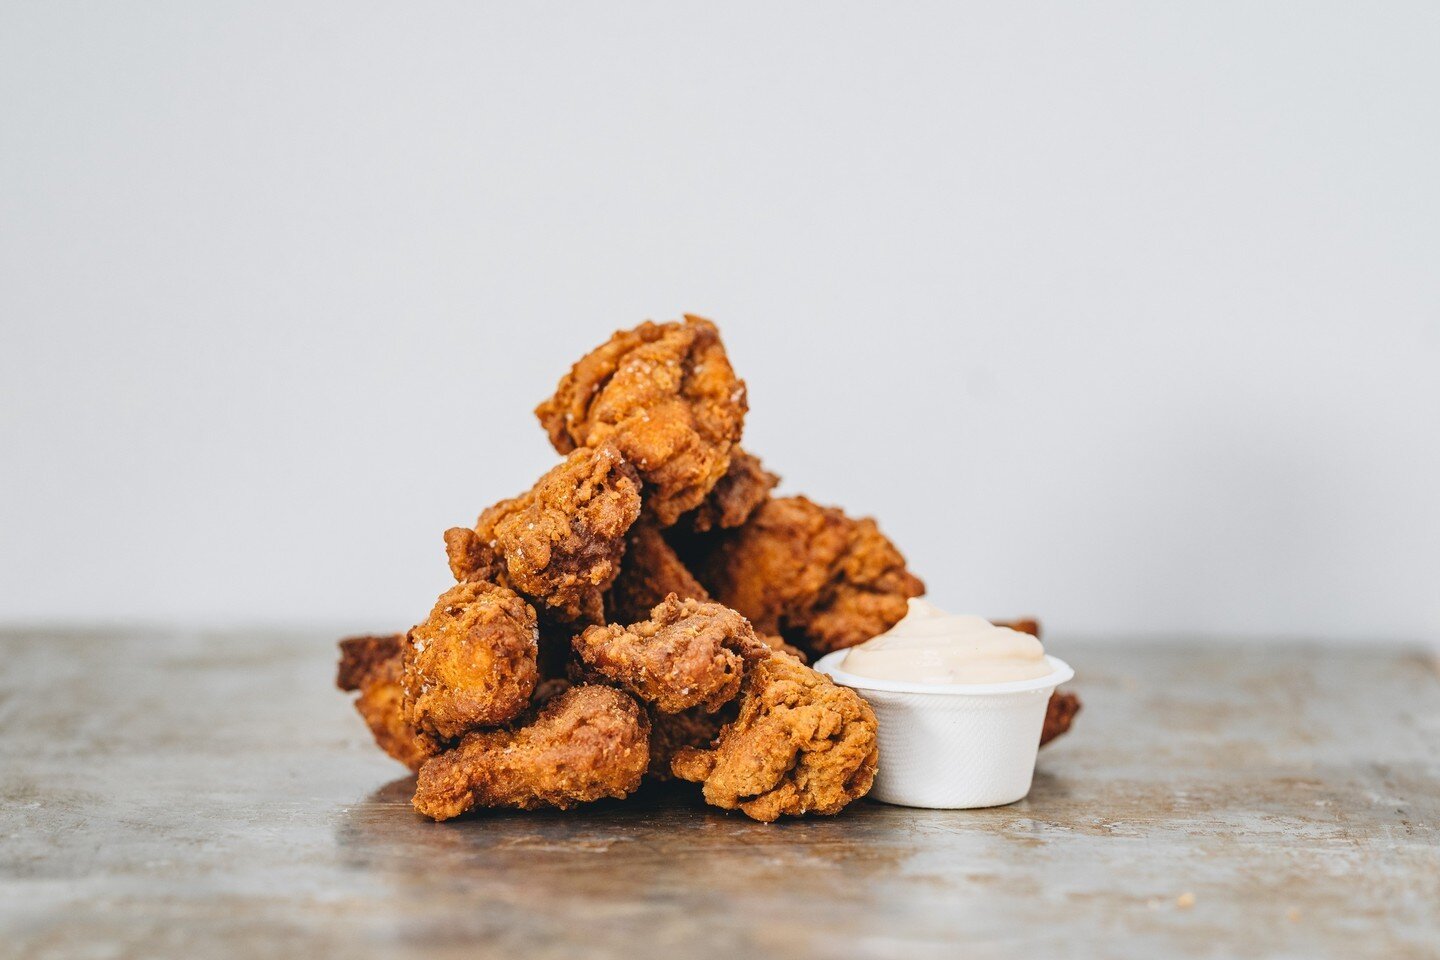 The Best Fried Chicken. ⁠
Actual. ⁠
⁠
MEMORIAL PARK ONLY⁠
www.thecraftedandco.nz/order-now⁠
⁠
⁠
#thecraftedandco #nuggs #nugglife #friedchicken #epicfood #foodtruckfood #palmerstonnorth #palmy #foodies #friedfood #foodtruckfood #crispychicken